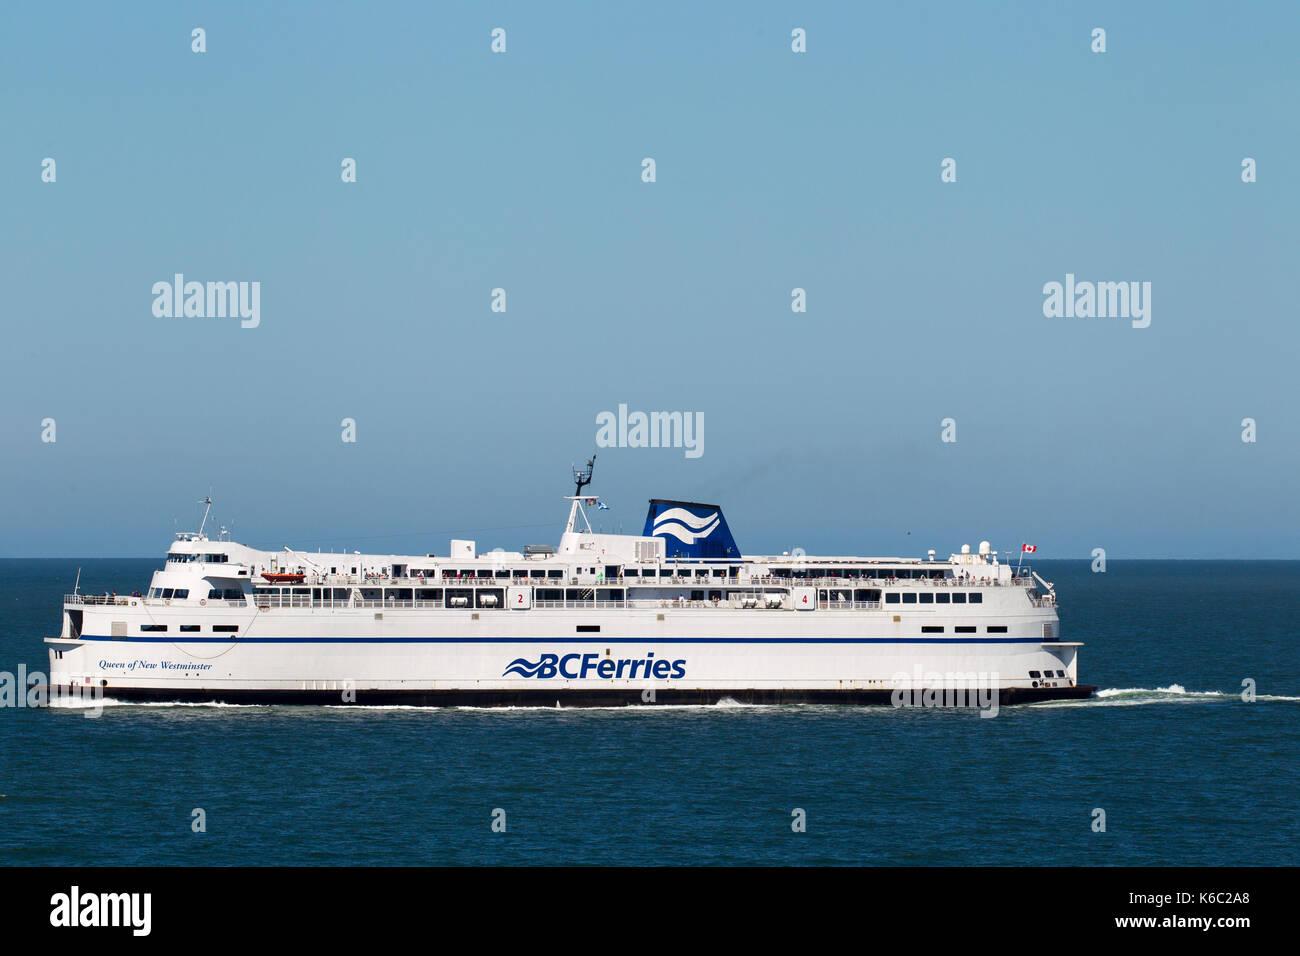 The Queen of New Westminster, a ferry of BC Ferries, between the Gulf Islands at Vancouver Island, British Columbia, Canada. Stock Photo